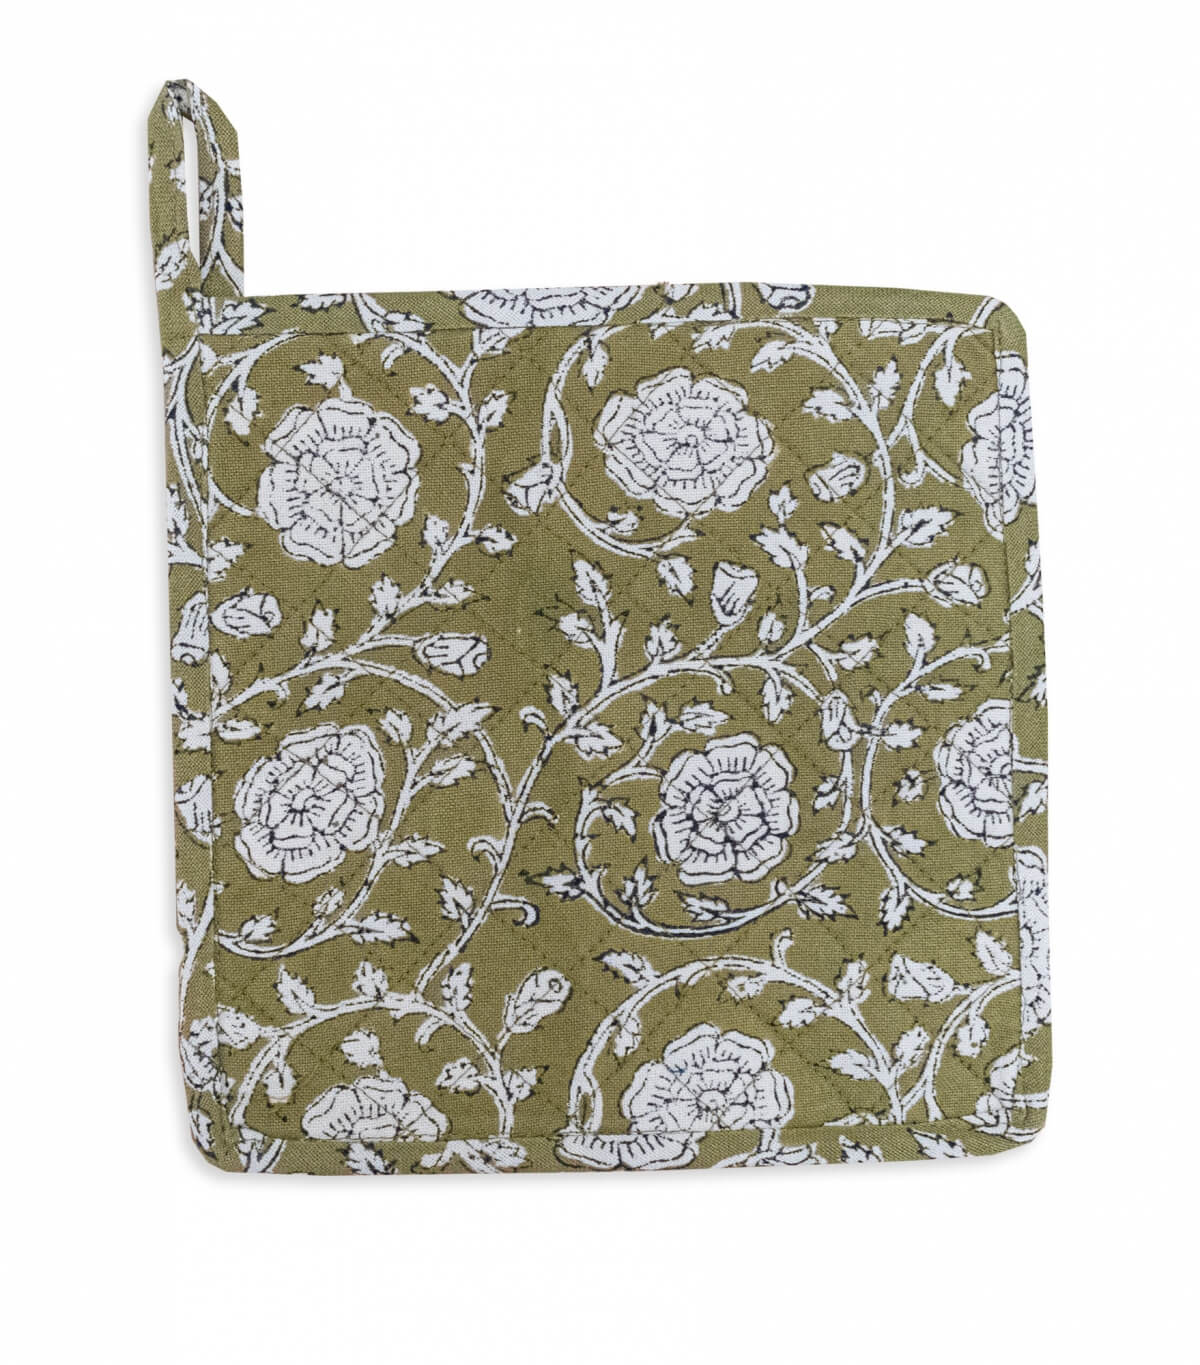 Hand printed hot plate holder 8x8 inches - olive